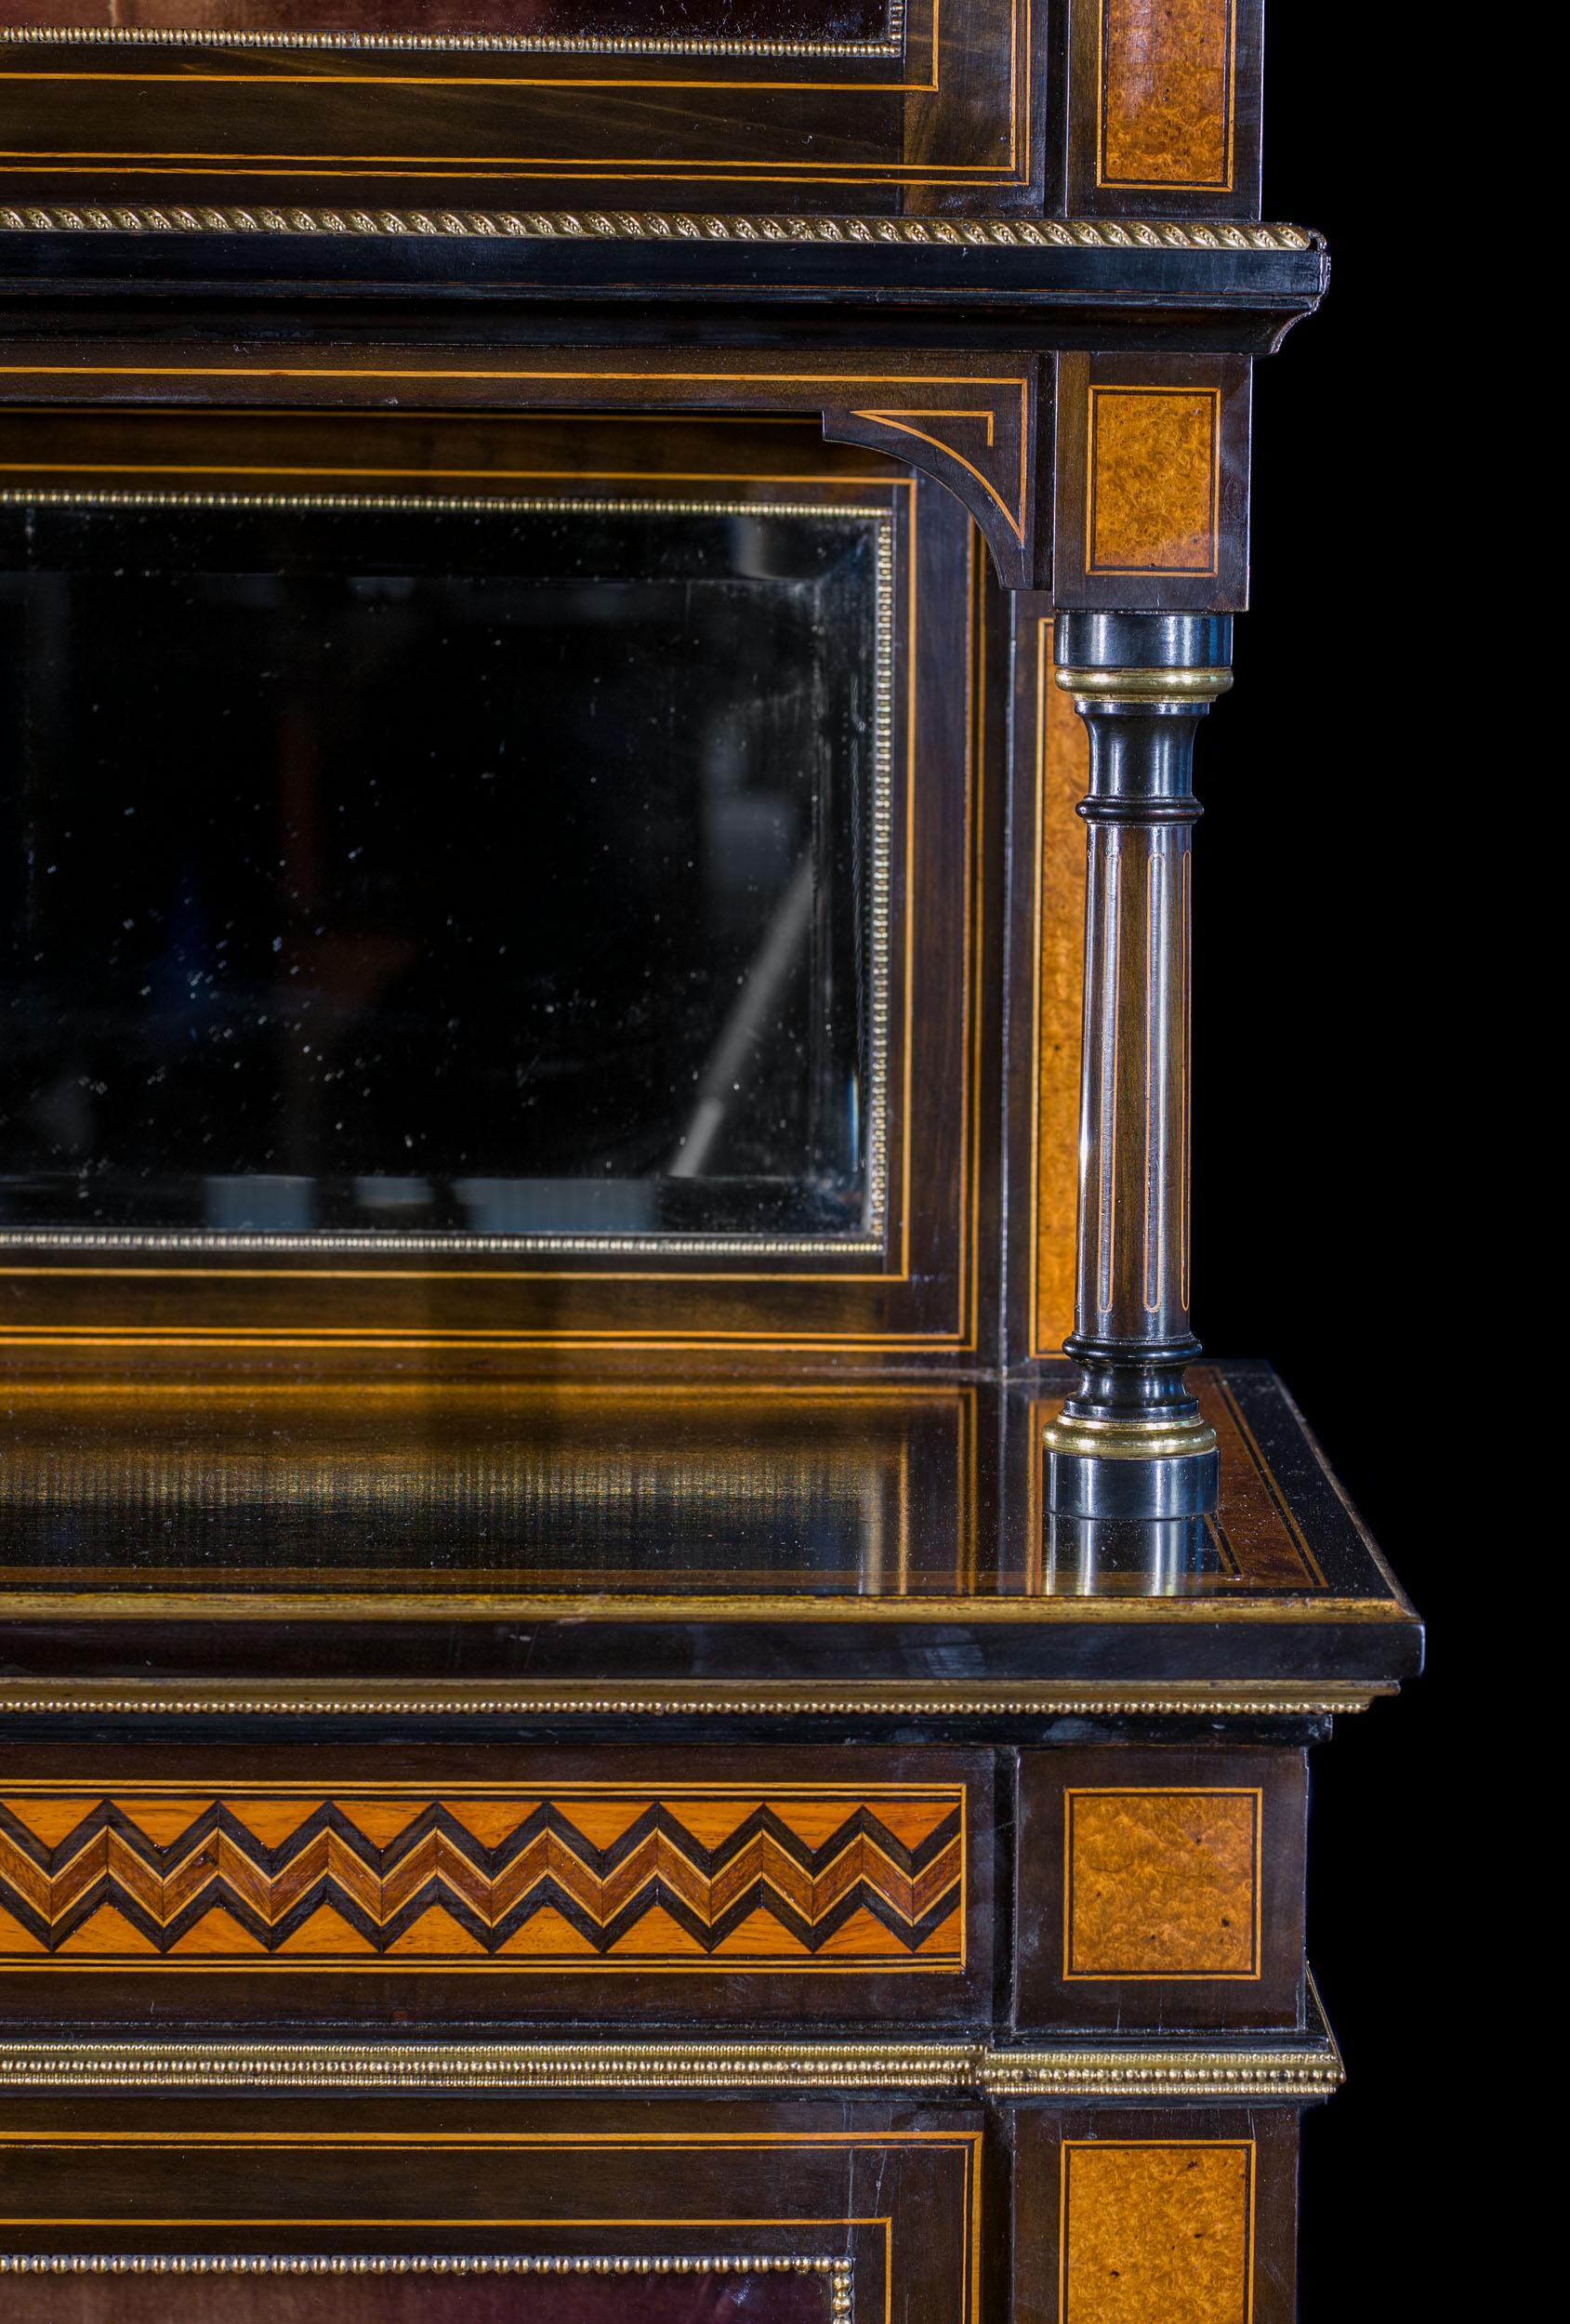 A pair of late Victorian display cabinets, ebonised and chequer inlaid with amboyna and purplewood, in the Aesthetic Movement style. Each cabinet has running gilt brass mounts, a baluster gallery above a pair of glazed doors enclosing two adjustable